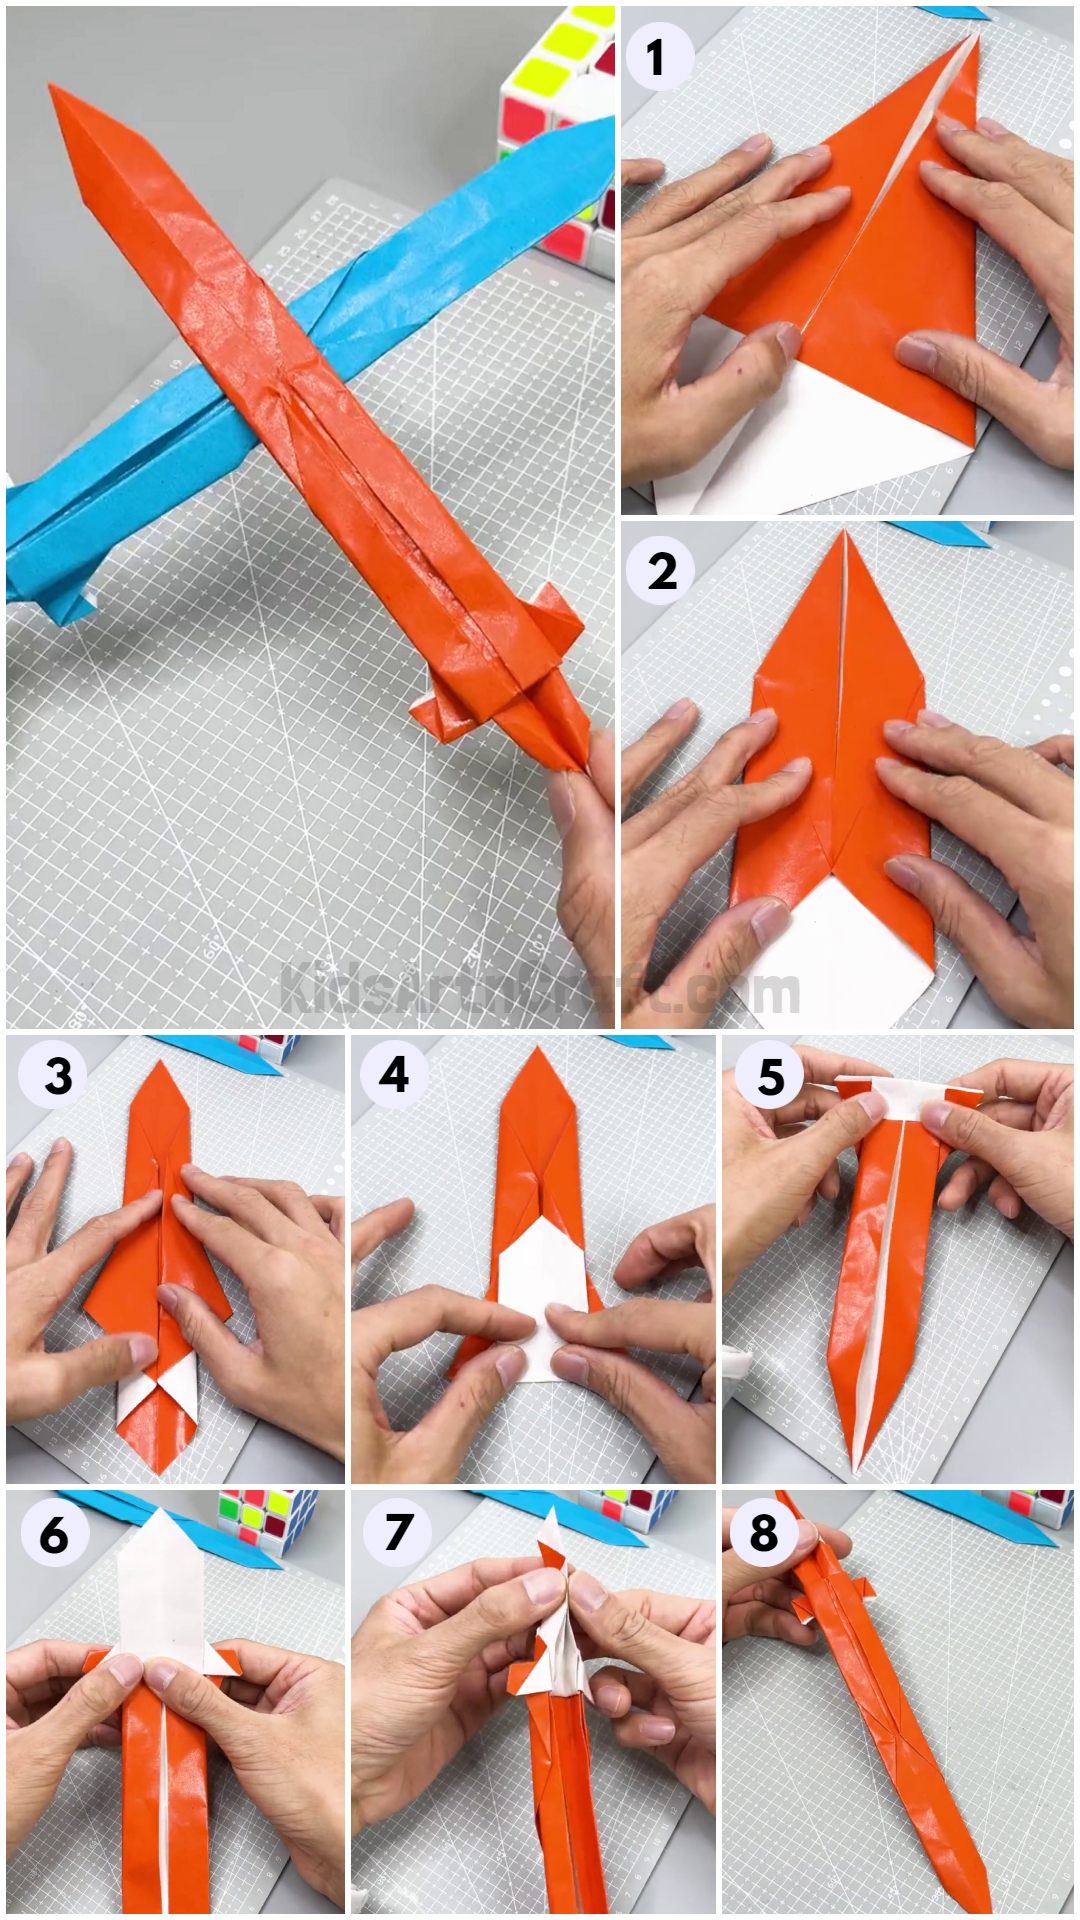 DIY Paper Sword Craft Tutorial for Kids With Step by Step Instructions